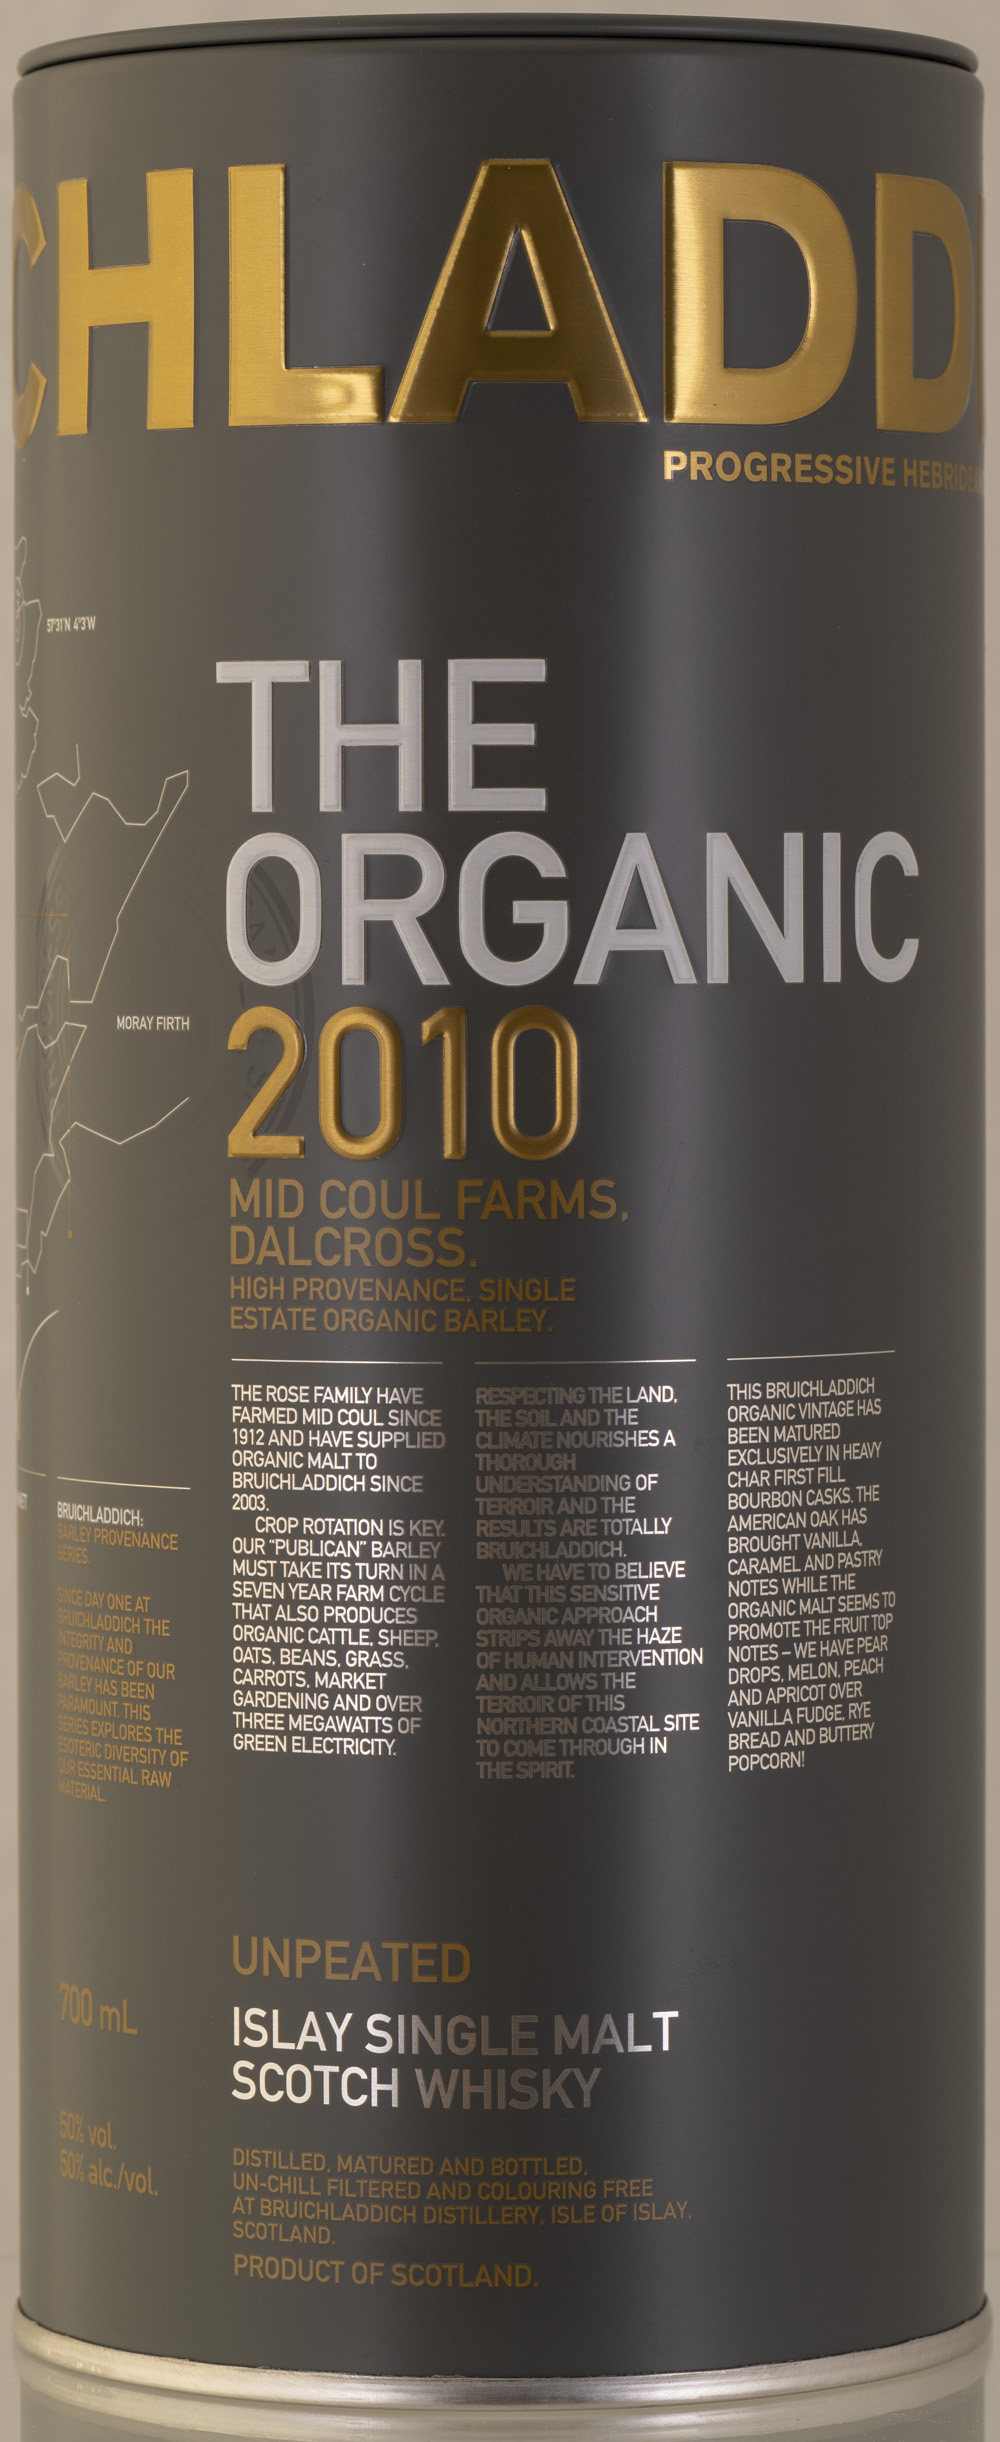 Billede: PHC_2286 - Bruichladdich the Organic 2010 Mid Coul Farms - tube front.jpg